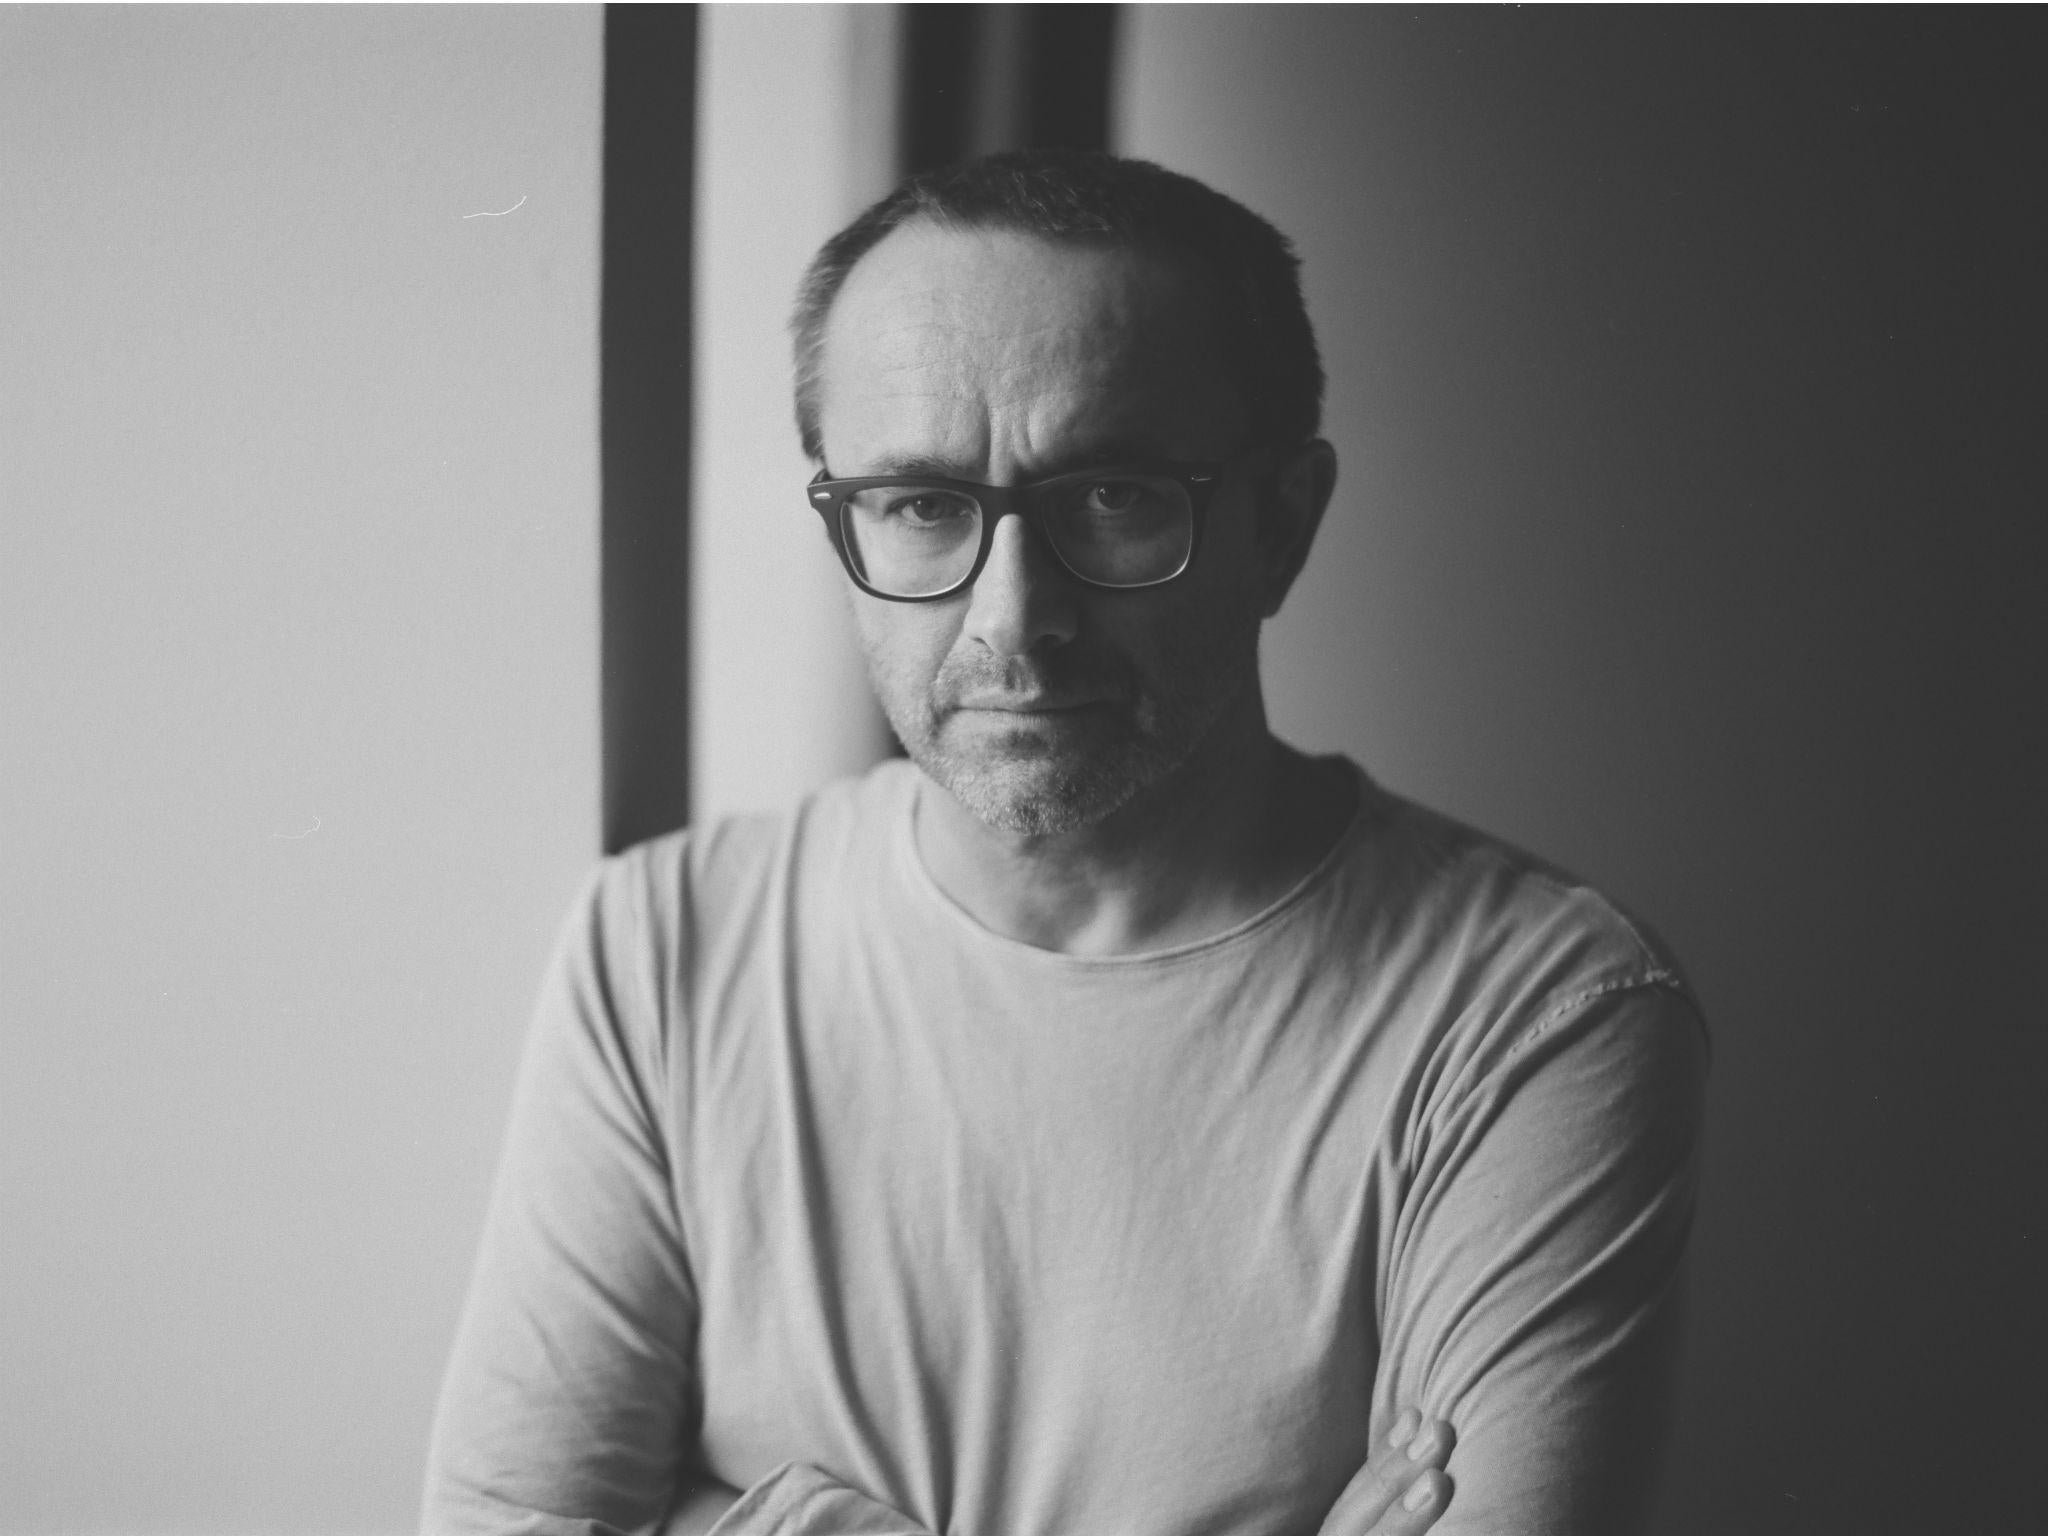 ‘Capitalism is indeed slavery. Whatever is your deity, whether it’s the rouble or the dollar or the phantom of communism, you are not free, you are enslaved,’ says Zvyagintsev (Courtesy of Altitude Films)